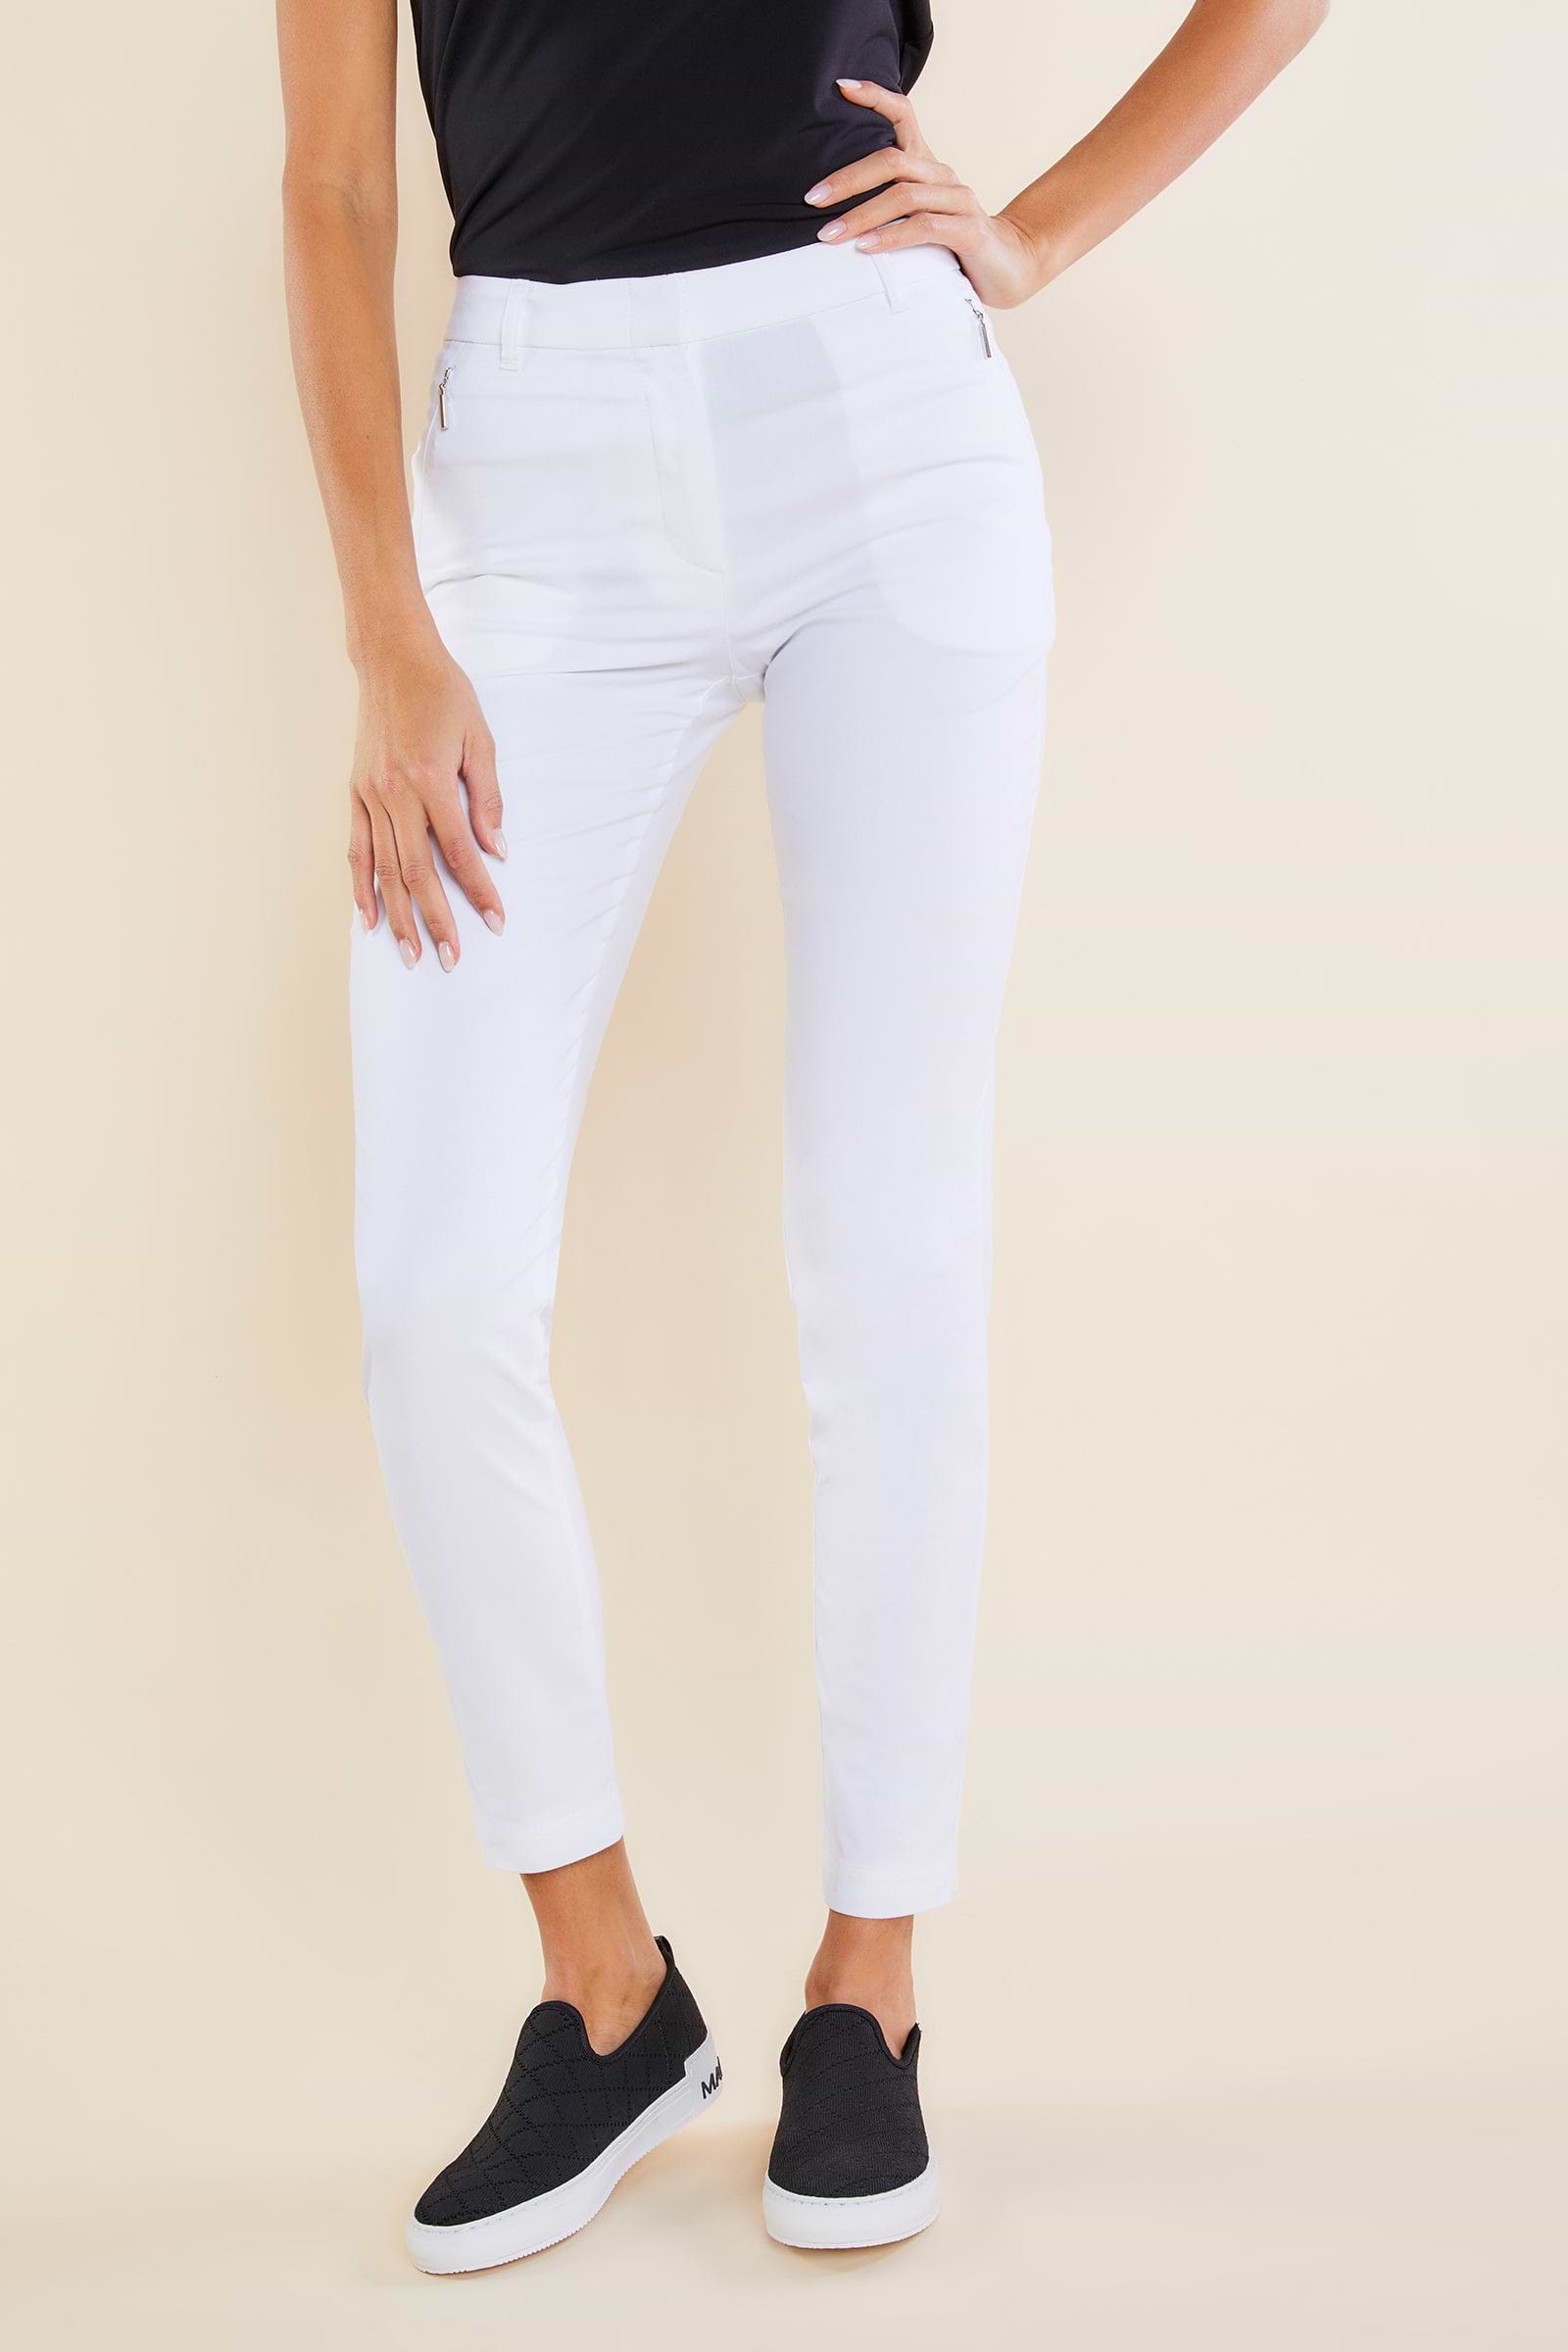 The Best Travel Pants. Front Profile of the Thea Curvy Pant in White.